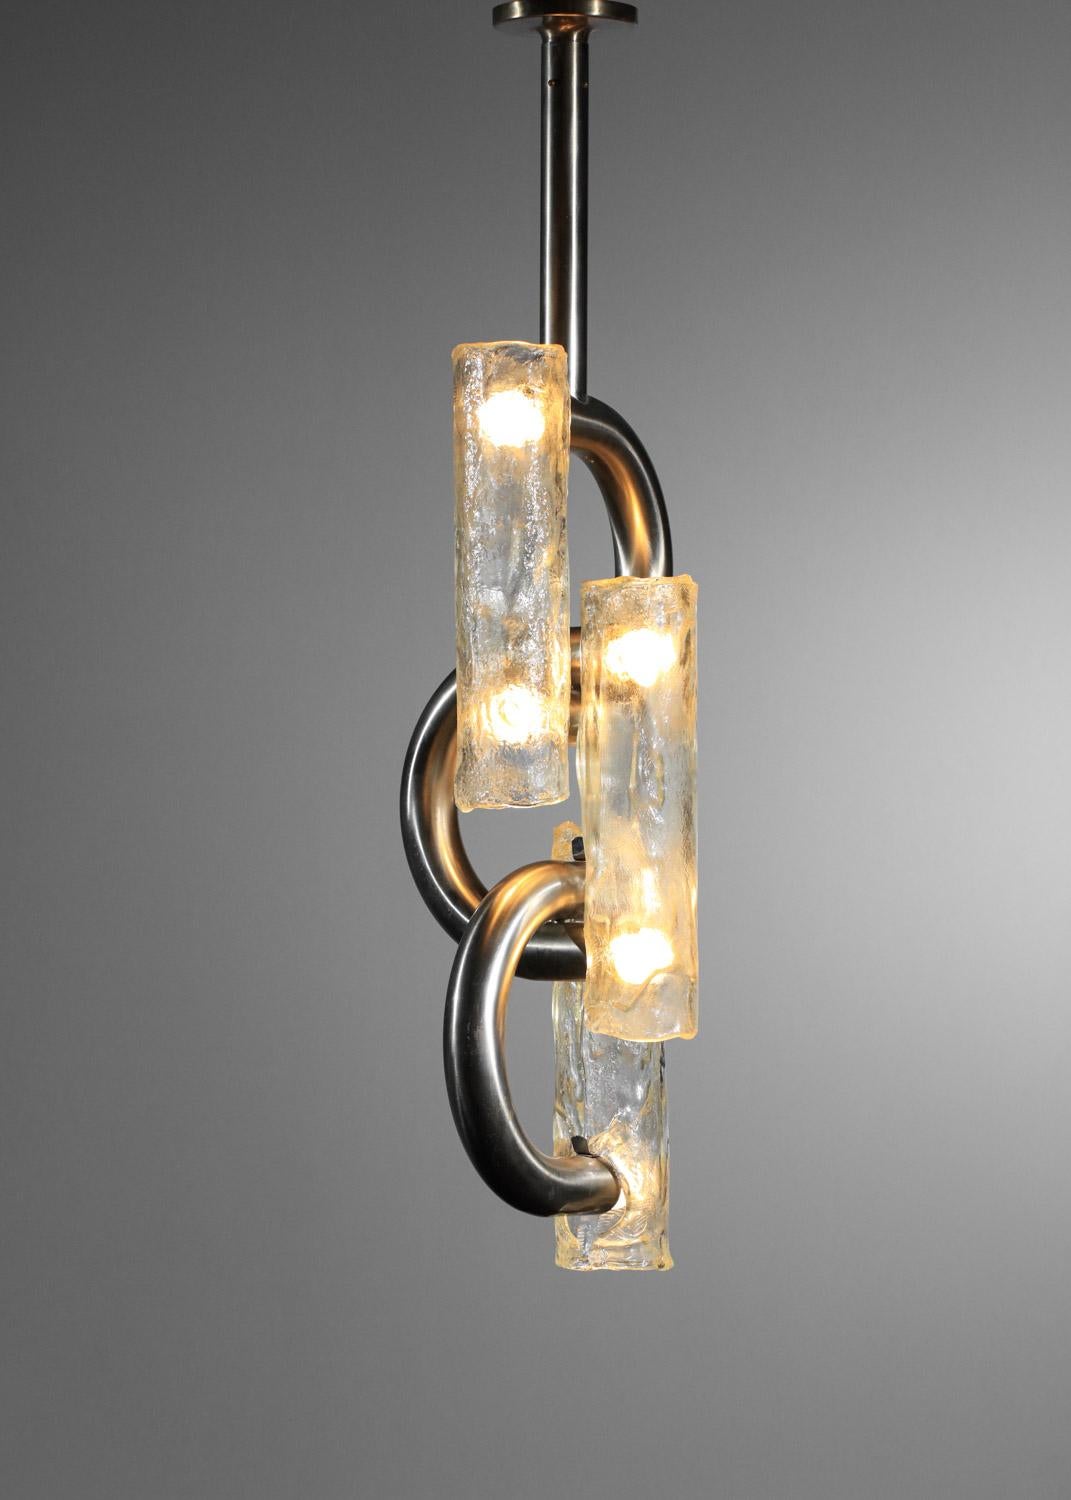 Large Italian suspension lamp edited by Stilux in the 50's modernist. Nickel-plated steel structure and thick transparent cast glass shade. Very nice vintage condition, note the traces of oxidation on the metal. Original electrical system, 6 LED